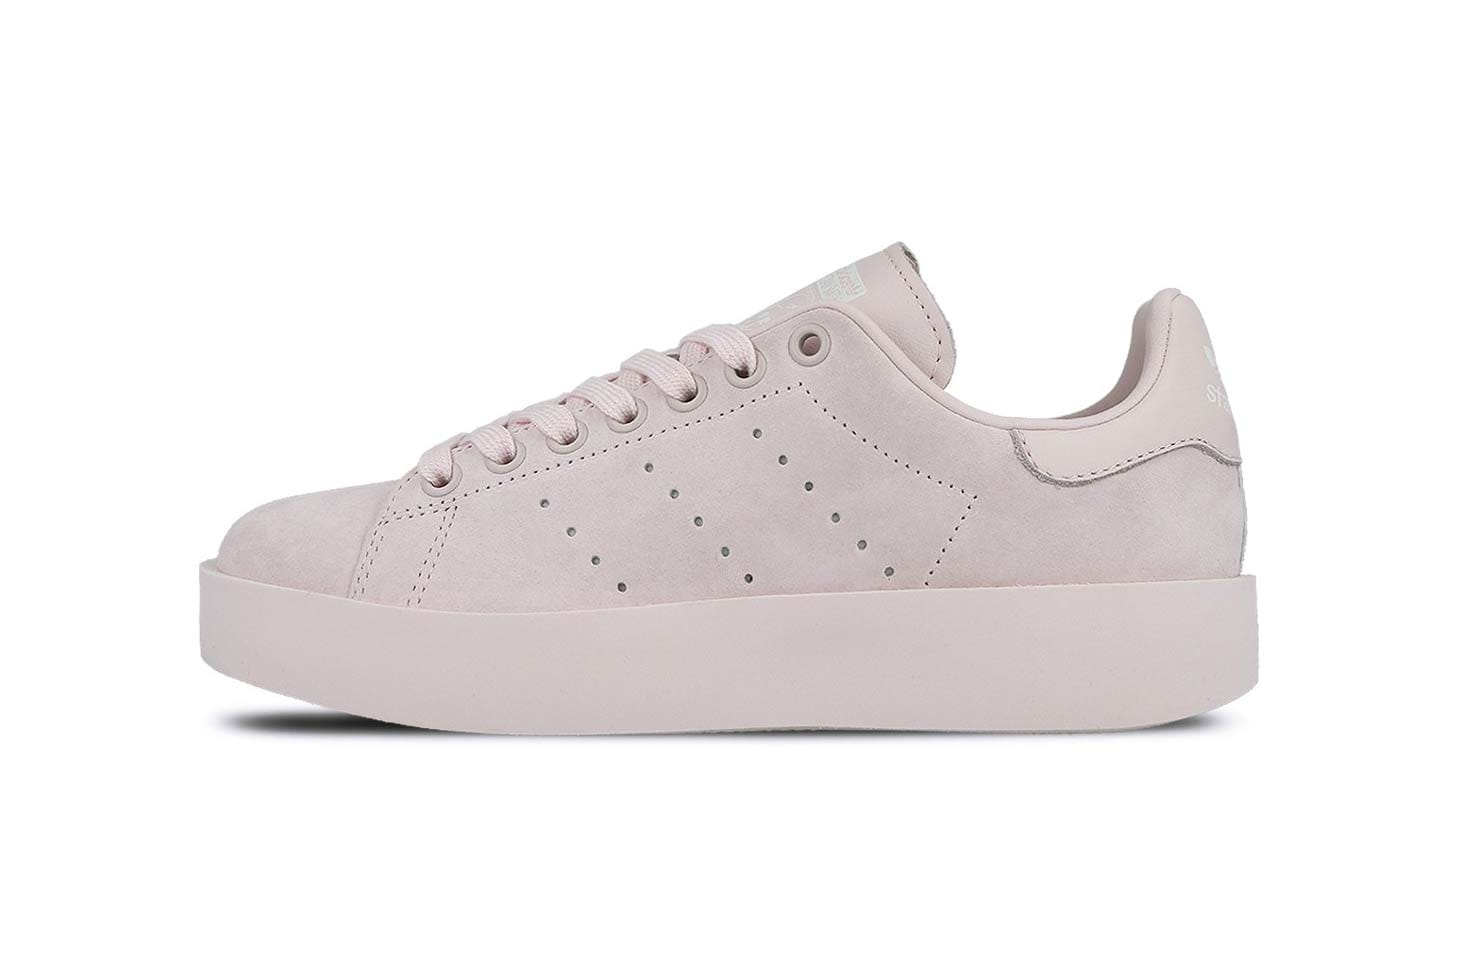 adidas Originals Stan Smith Bold in Orchid Tint | HYPEBAE